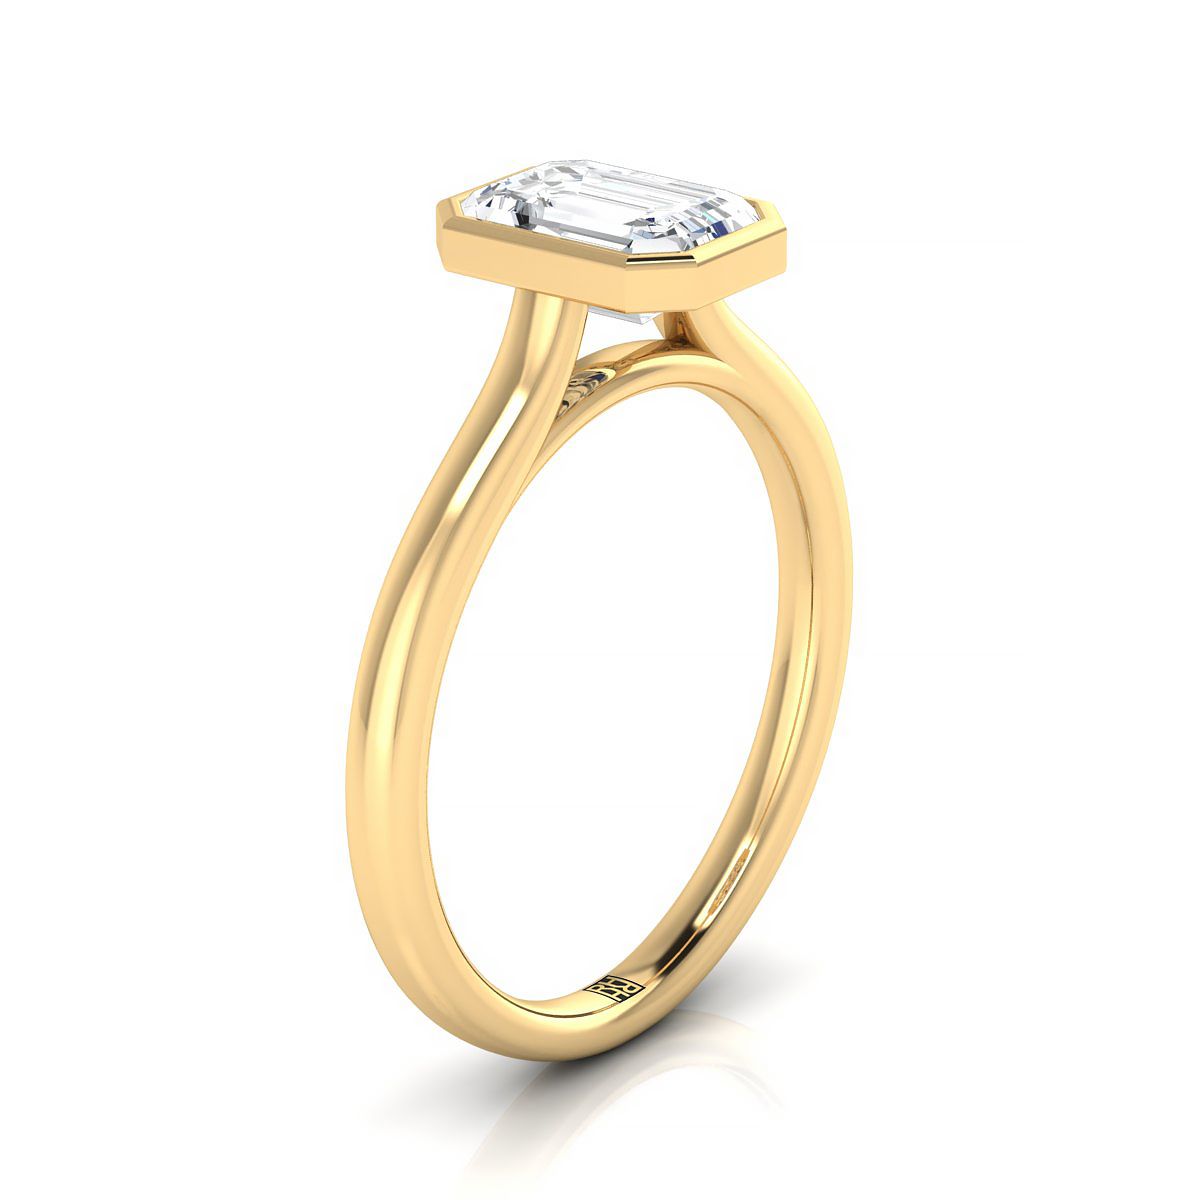 14K Yellow Gold Emerald Cut  Simple Bezel Solitaire Engagement Ring